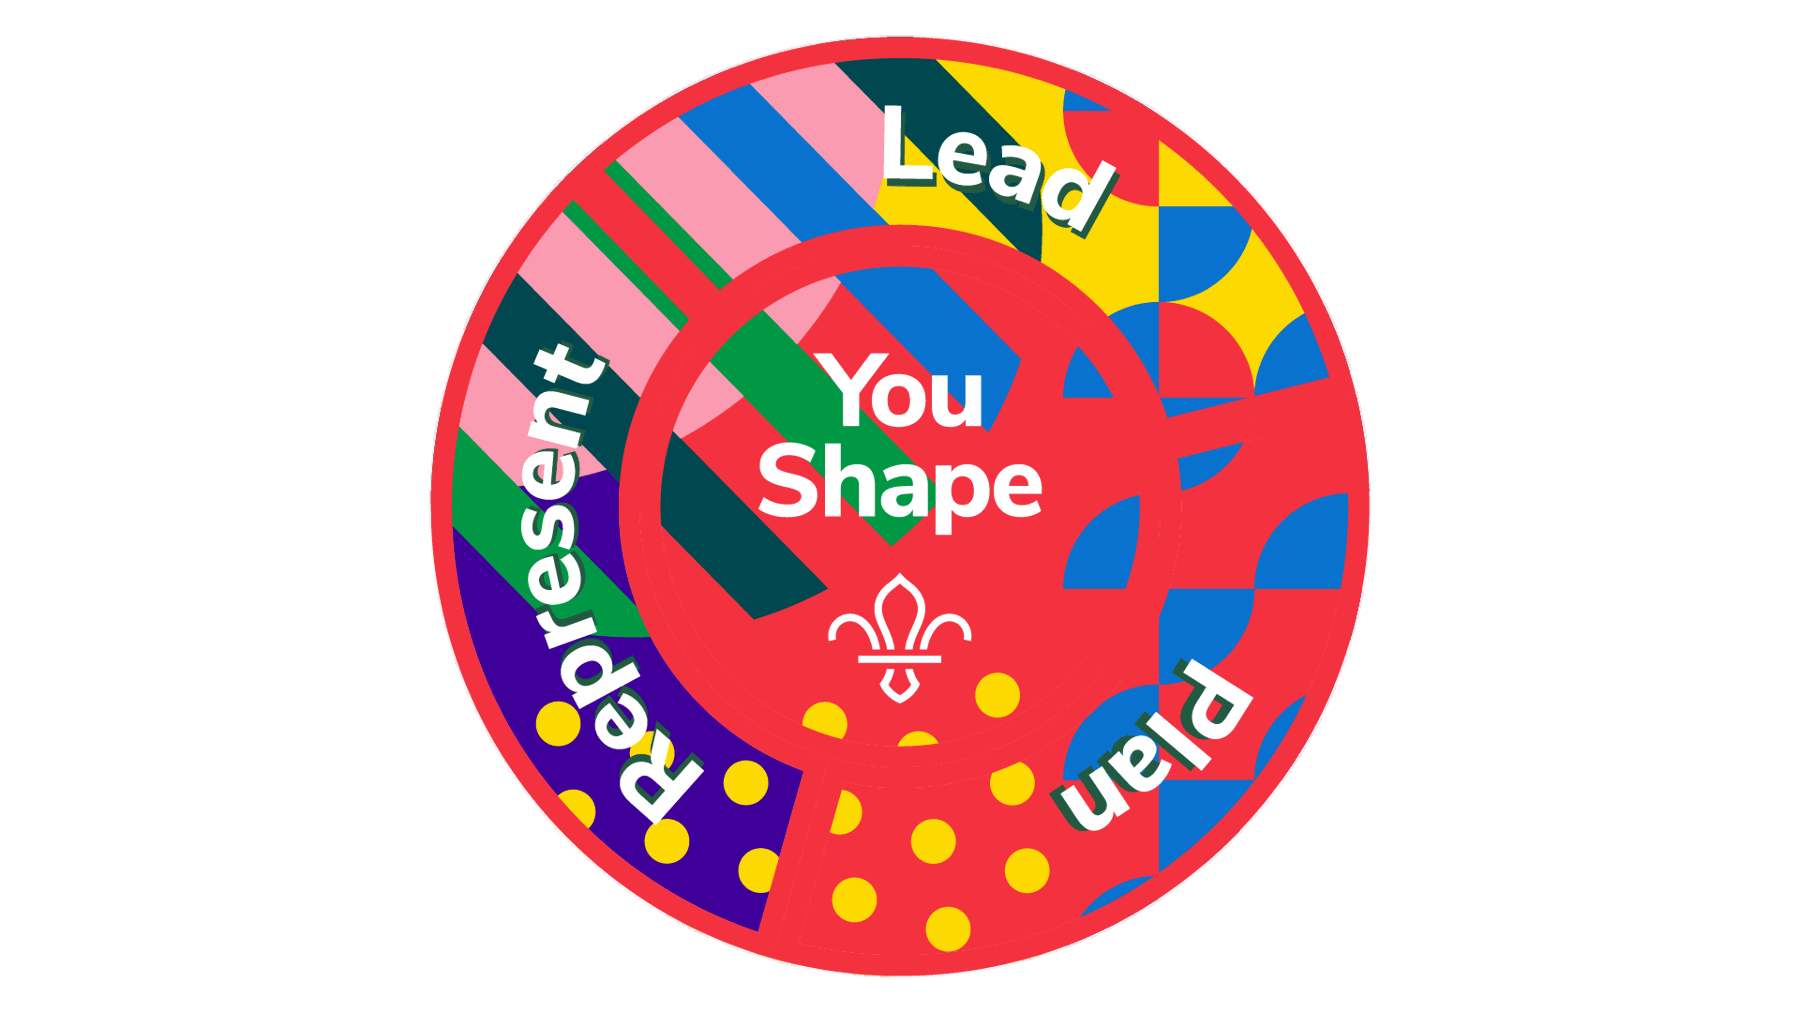 The Squirrels YouShape badge